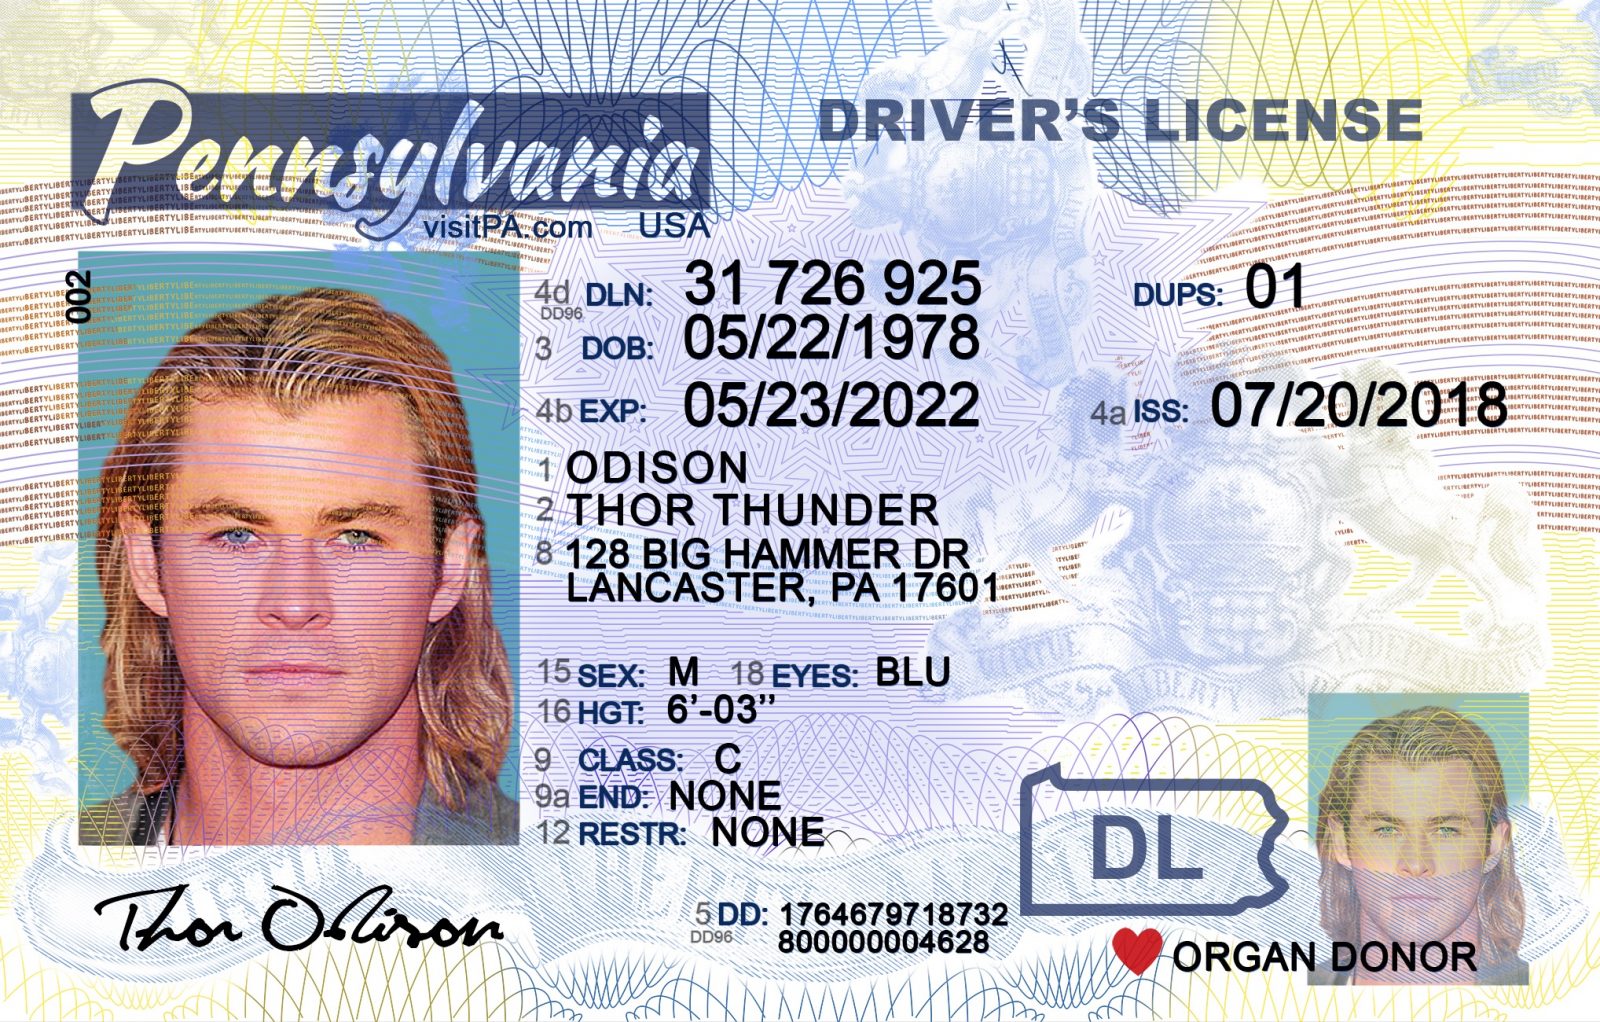 Font Used On Pennsylvania Drivers License